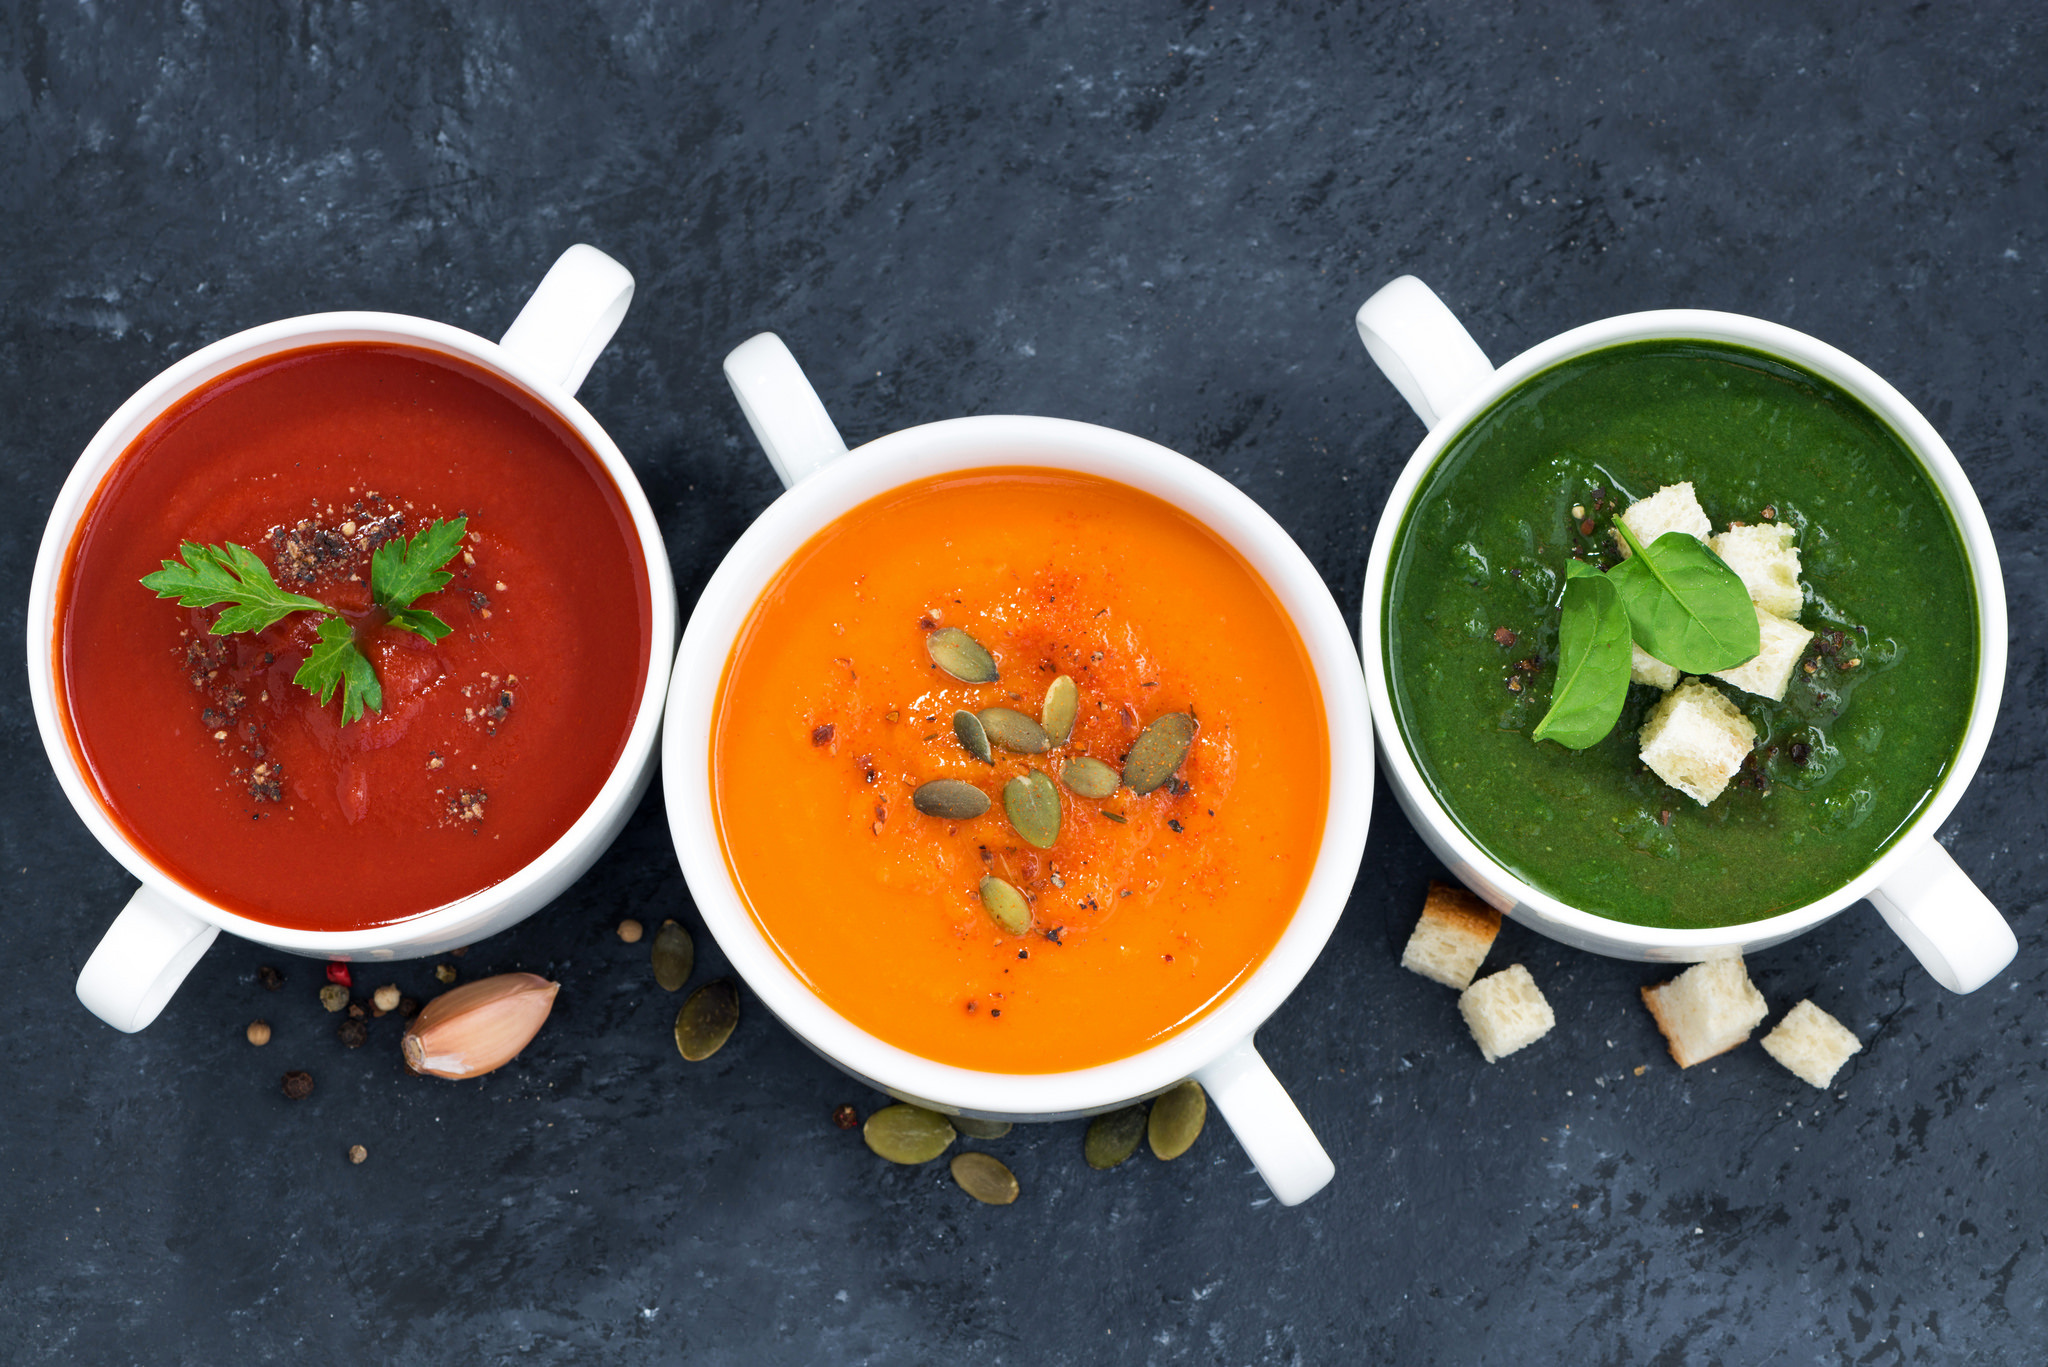 Download wallpaper soup, pumpkin, seeds, tomato, spinach, section food in r...